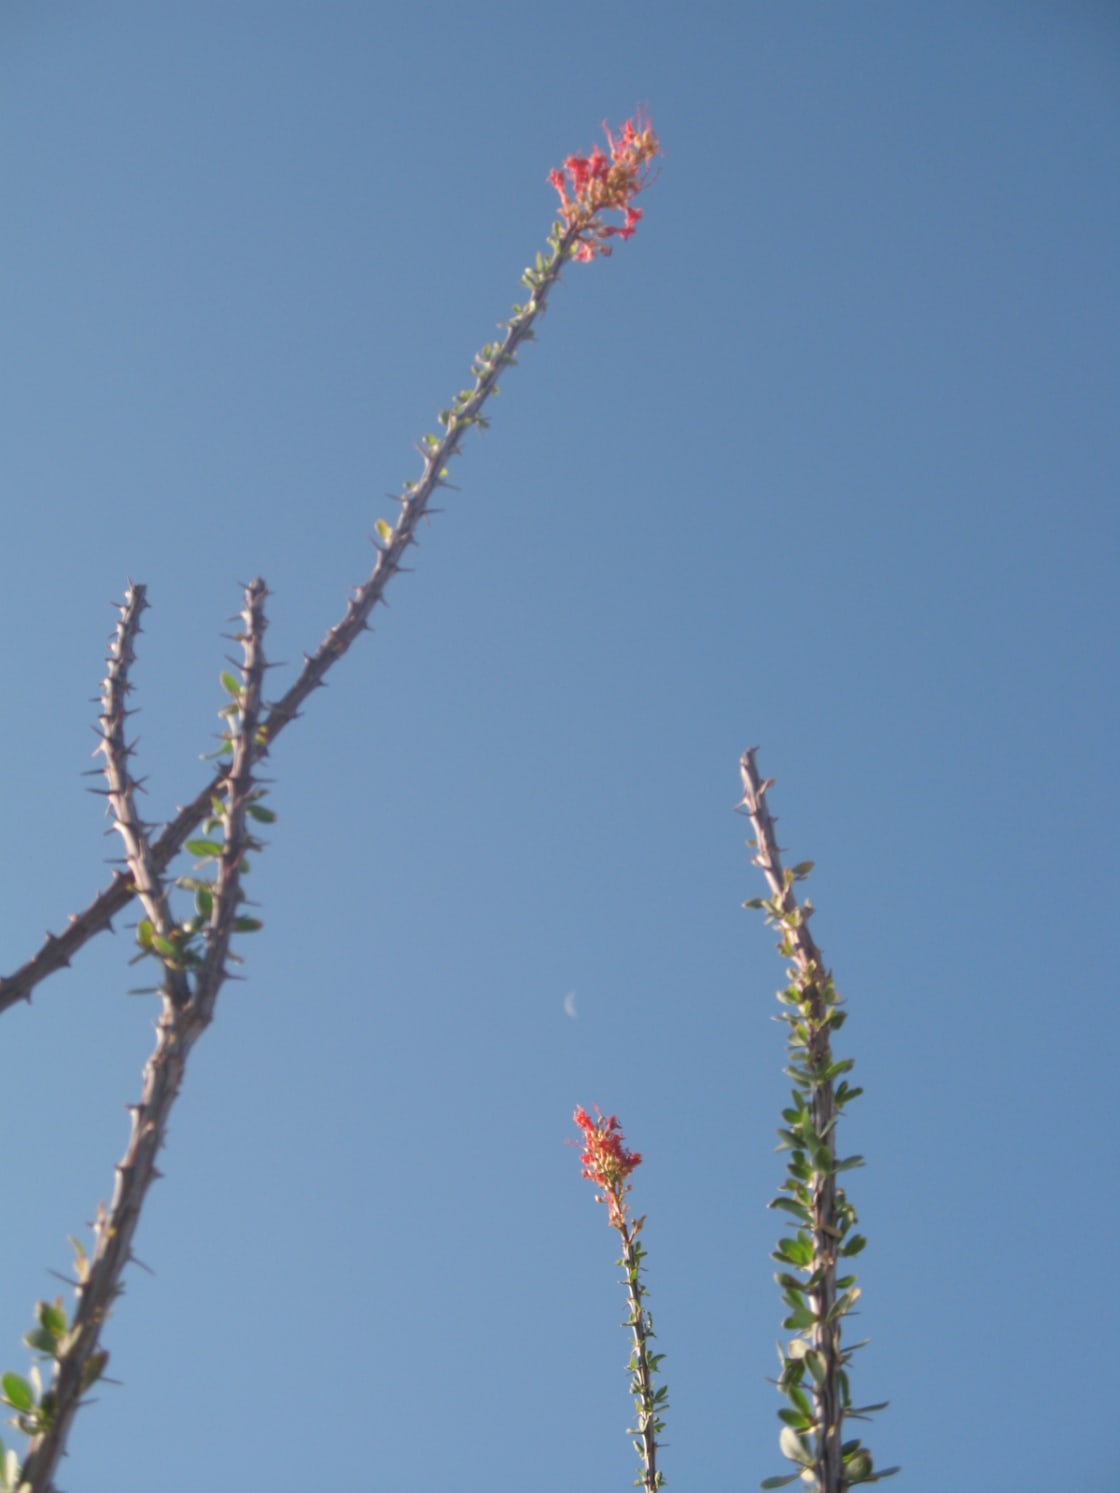 A blooming ocotillo on the property attracts honey bees and hummingbirds.